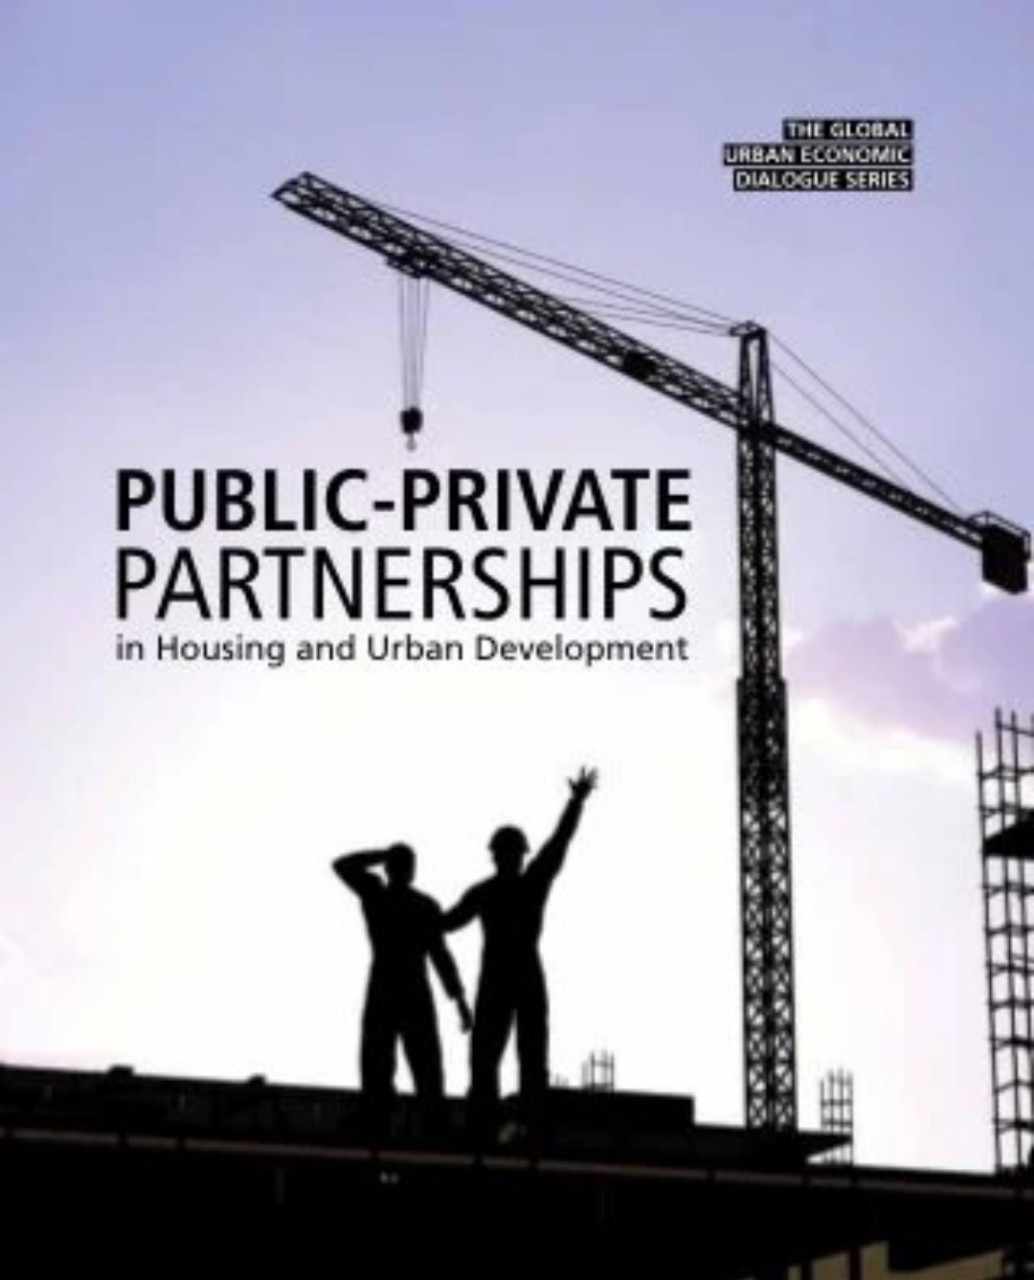 Regulations on investment under the model of public-private partnership in Vietnam